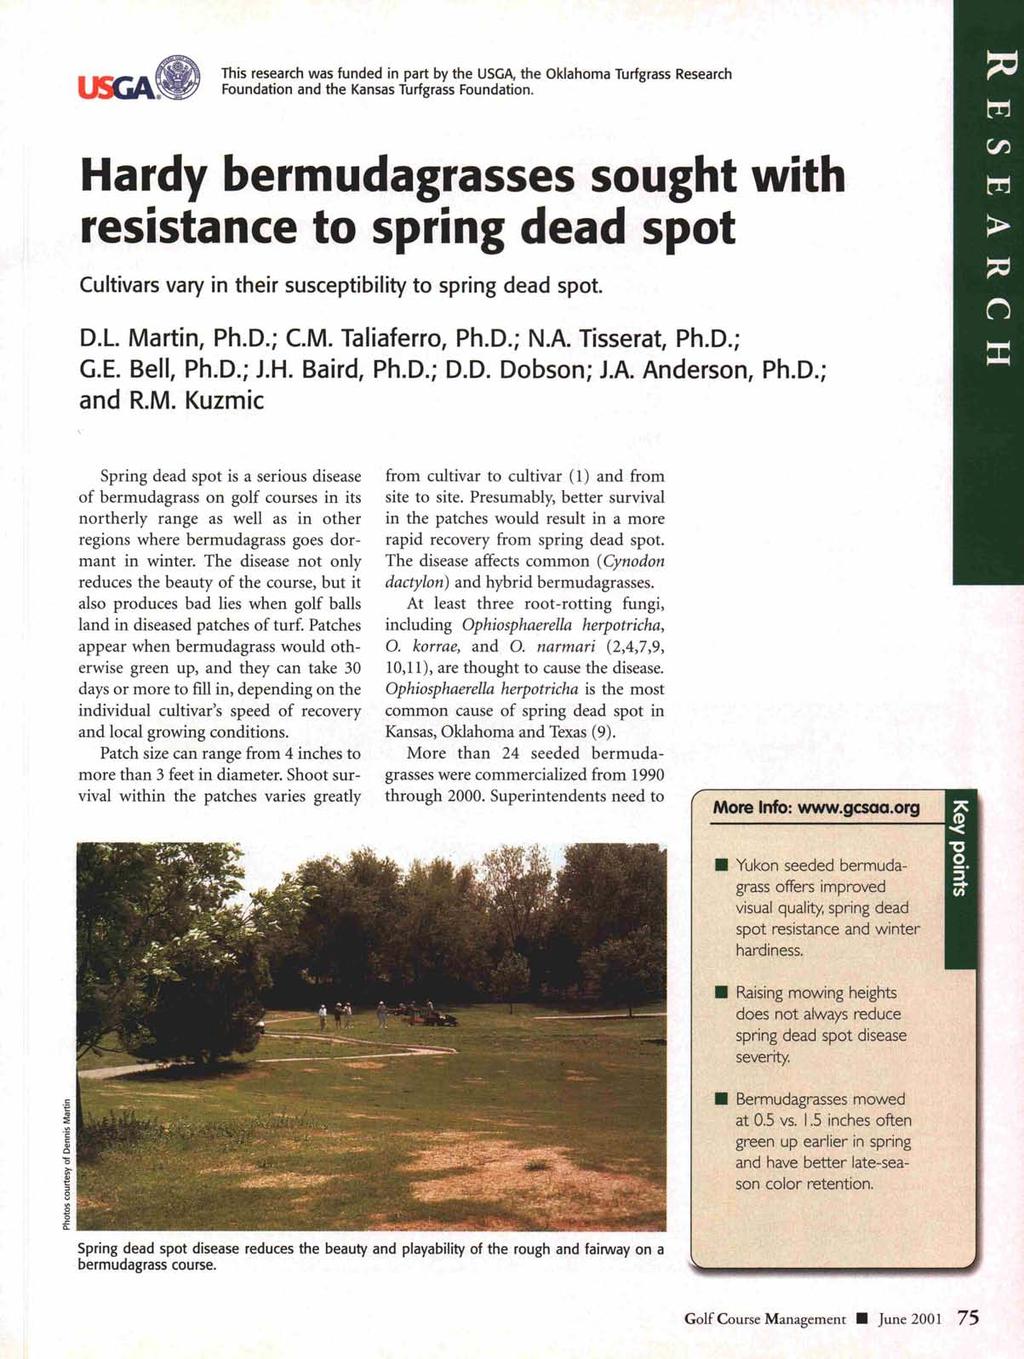 USCiA~.. This research was funded in part by the USGA, the Oklahoma Turfgrass Research Foundation and the Kansas Turfgrass Foundation.